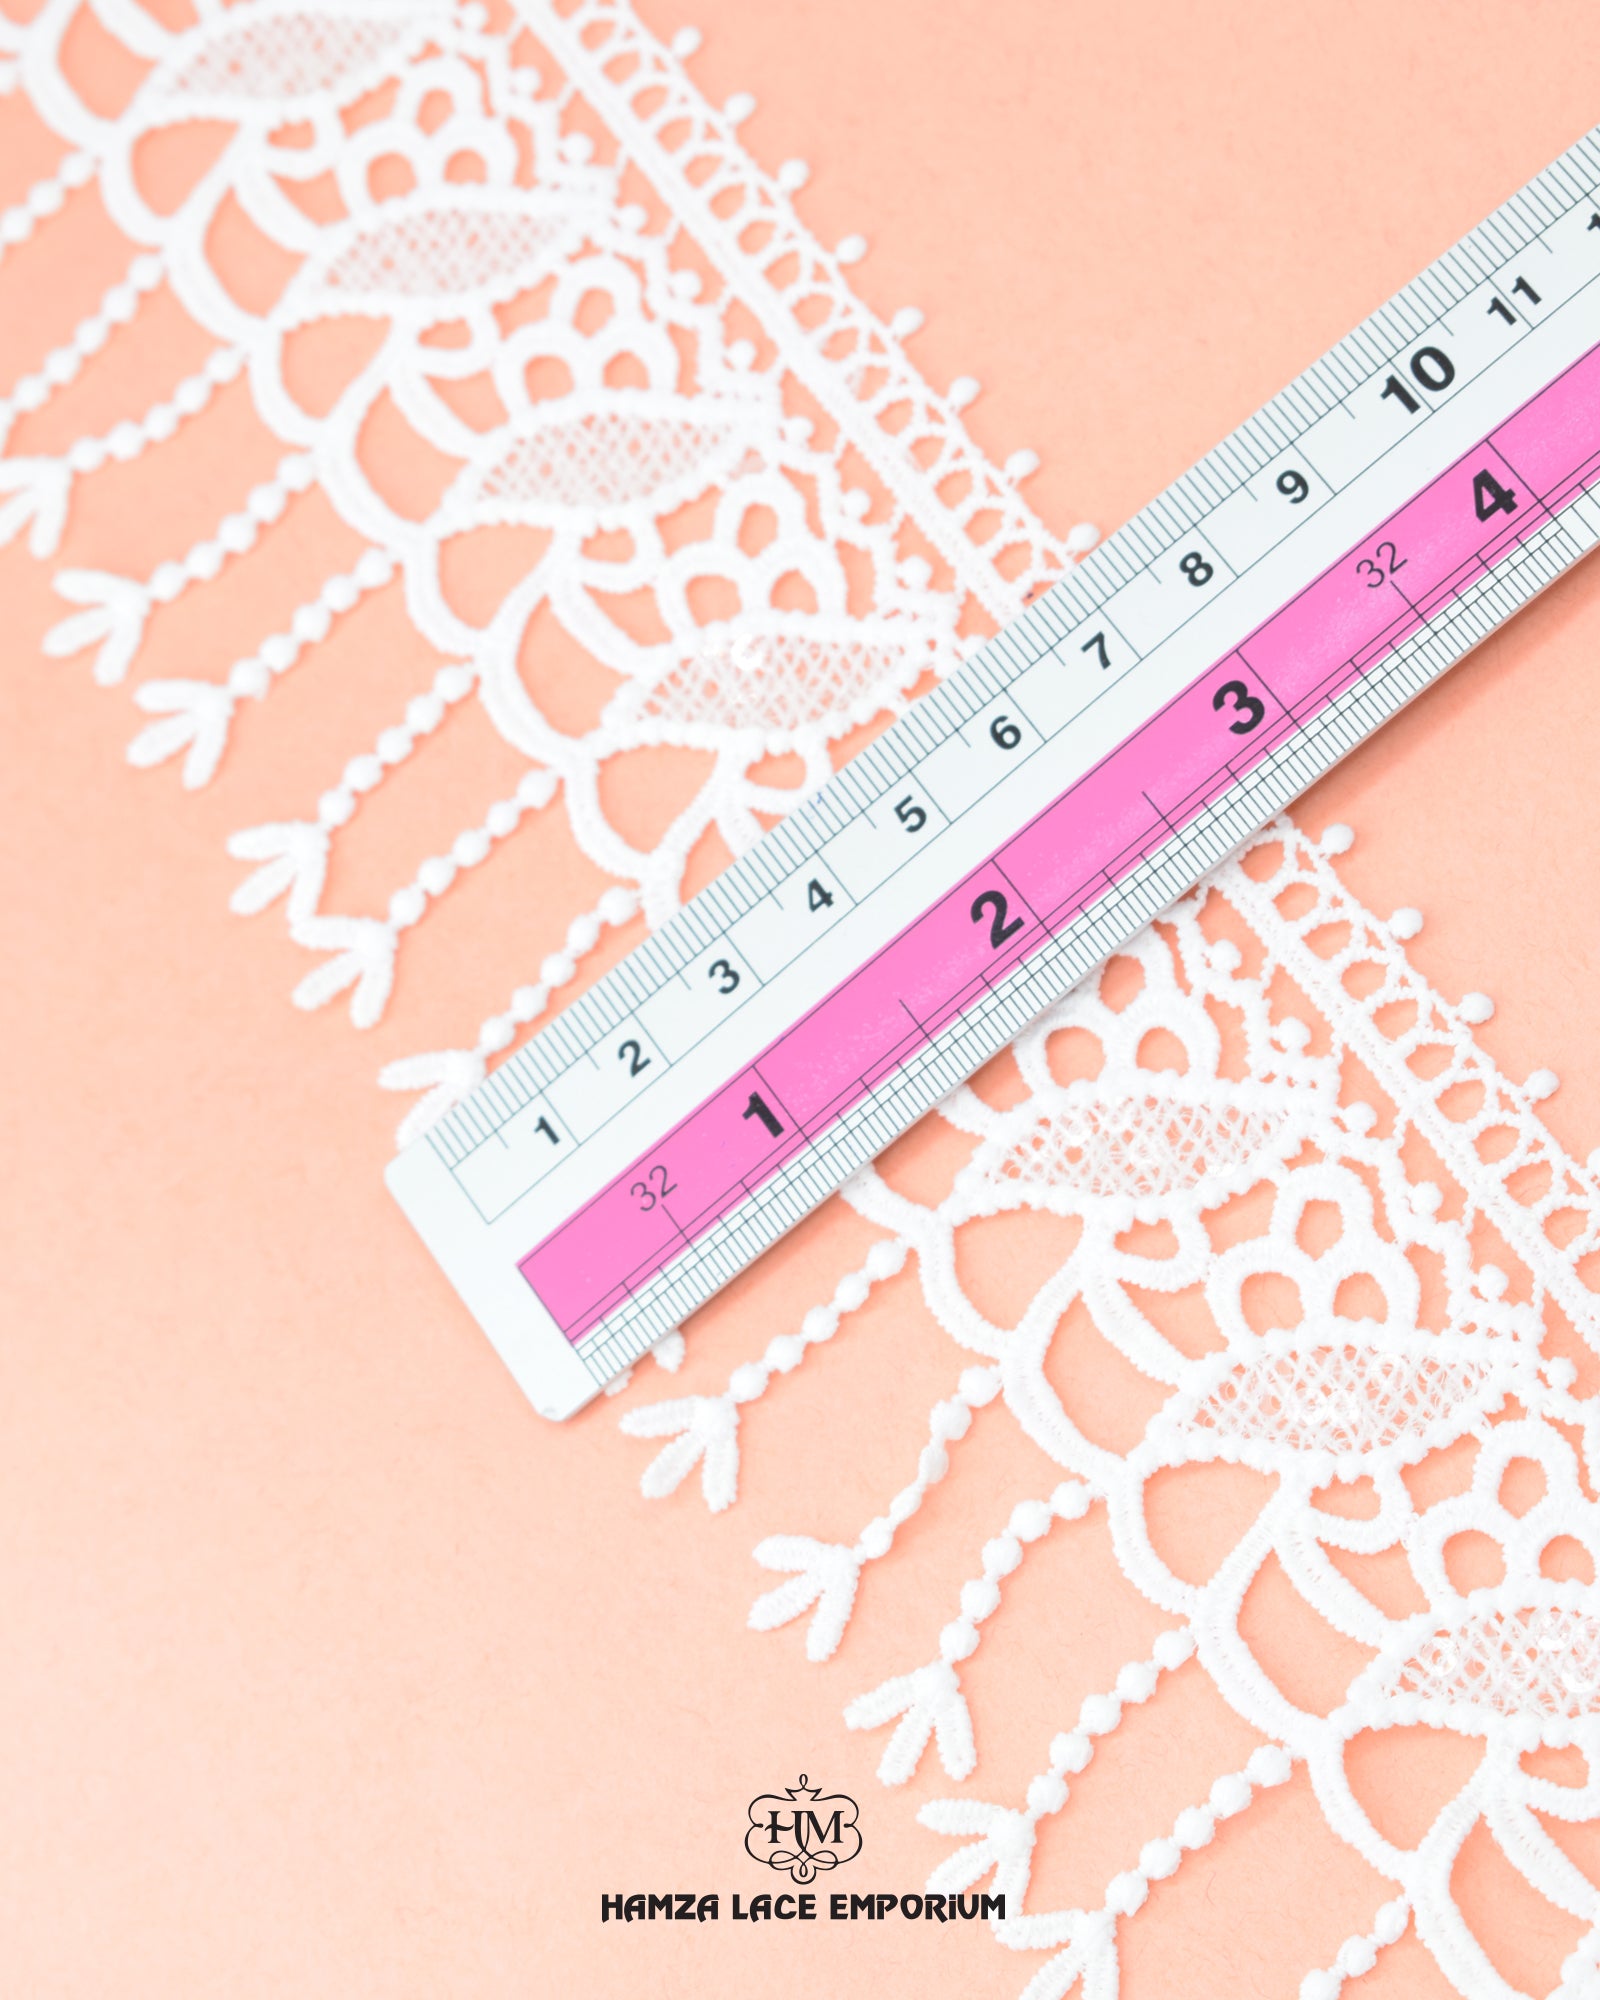 Size of the 'Edging Flower Lace 23085' is shown as '3' inches with the help of a ruler